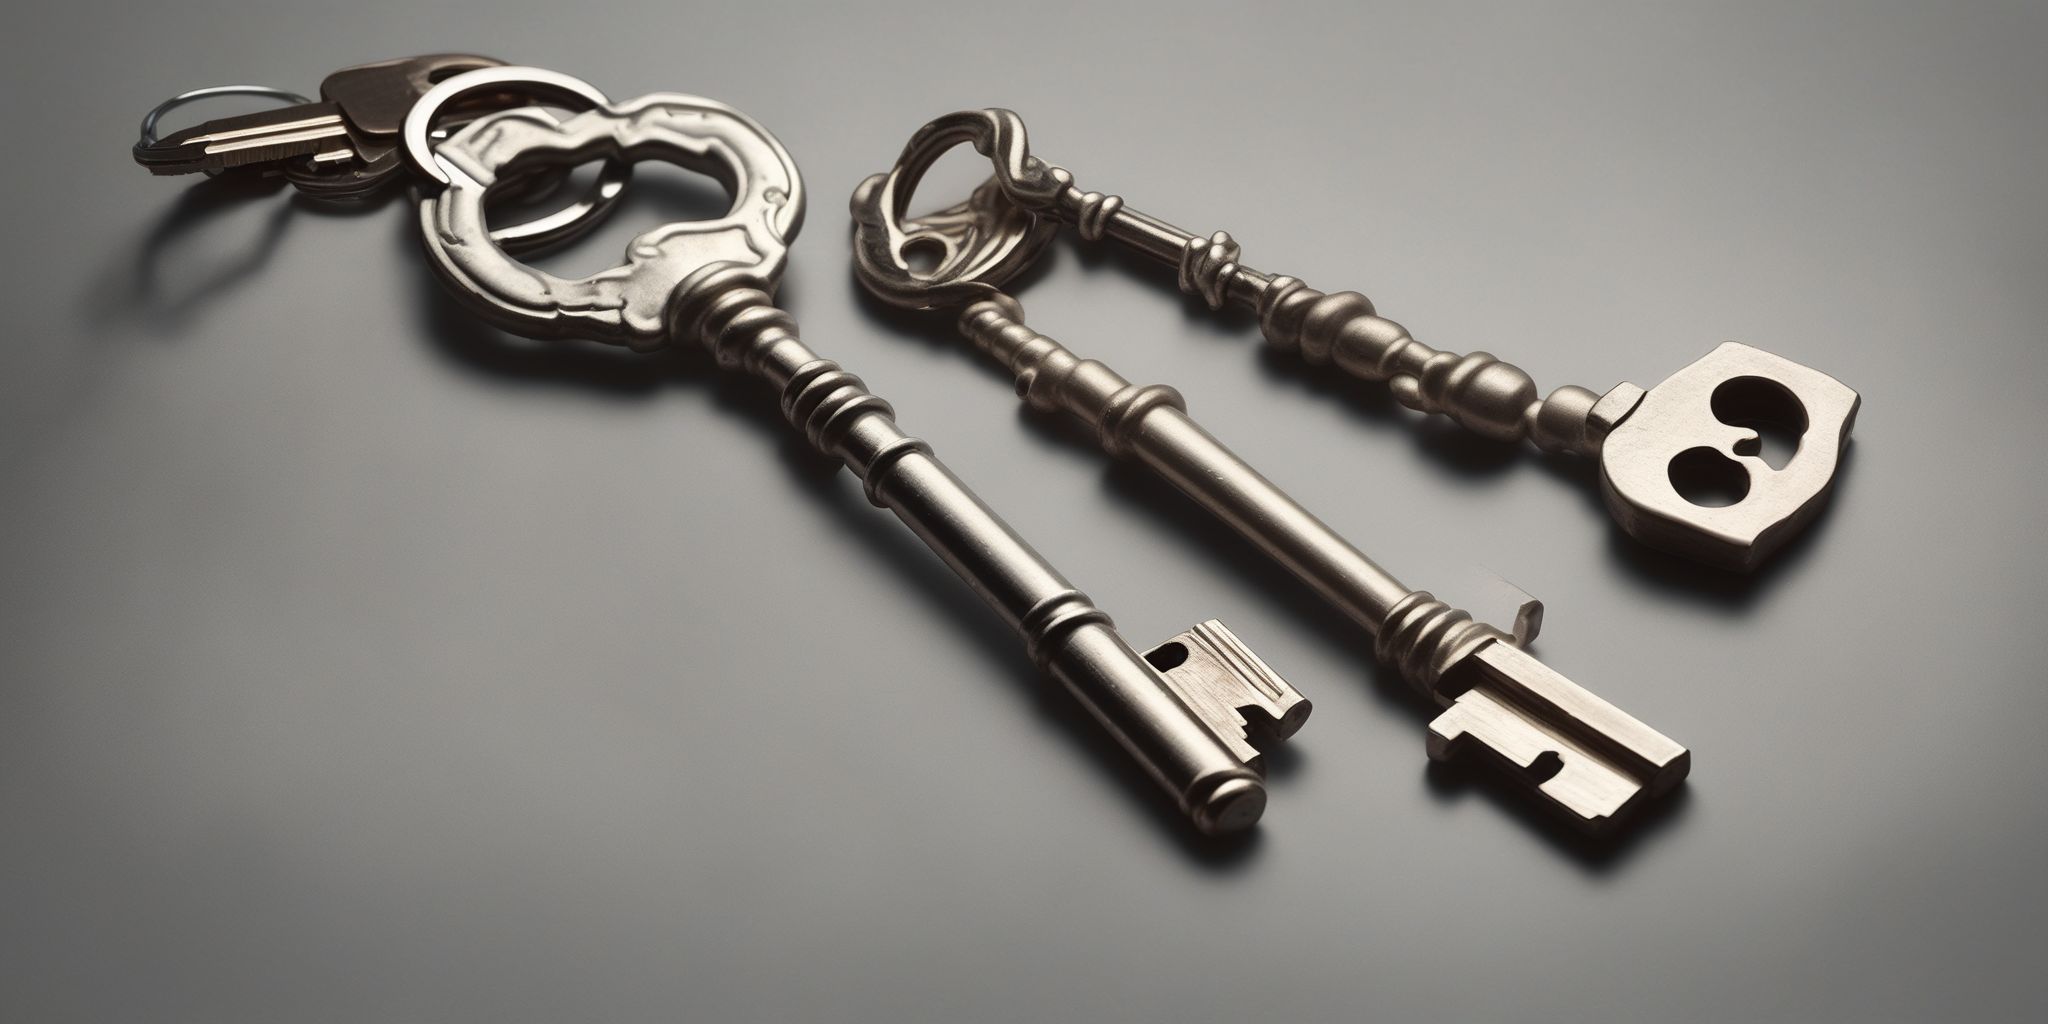 Key  in realistic, photographic style